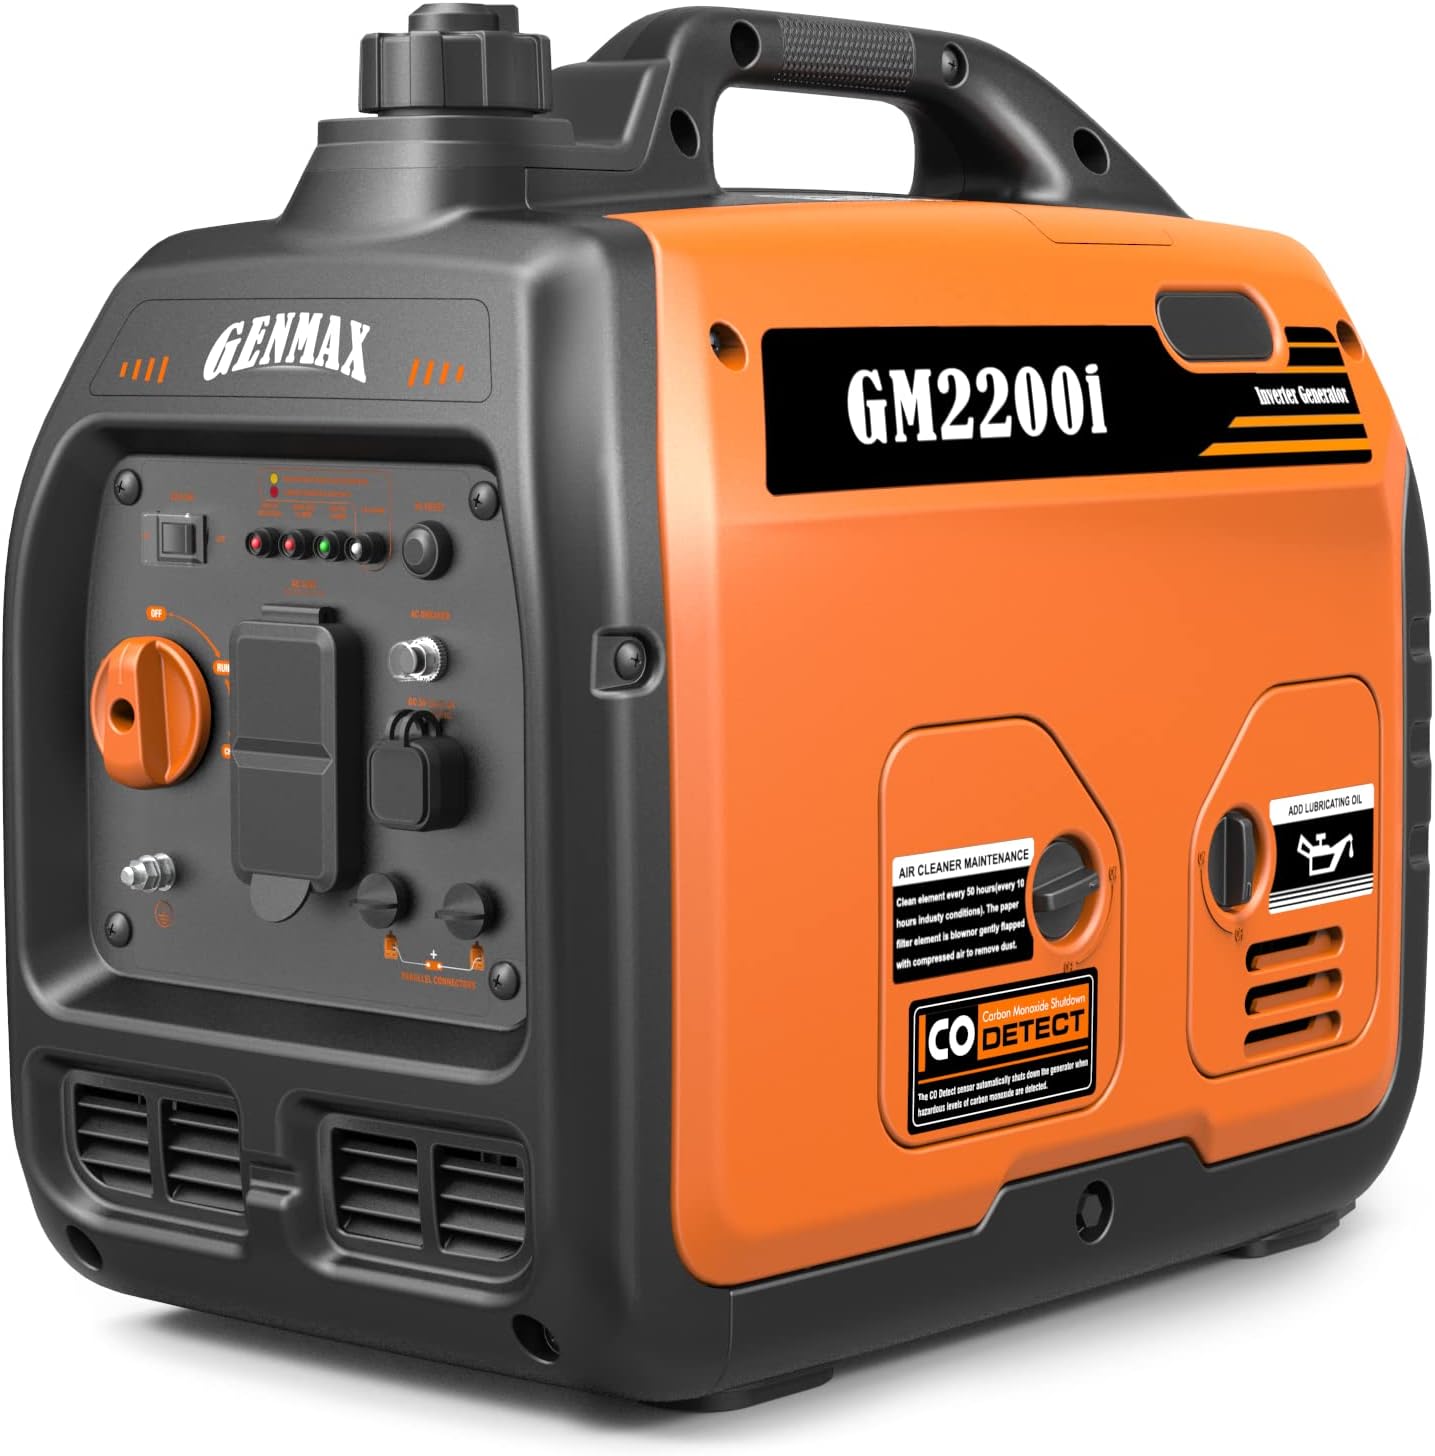 GENMAX, GENMAX GM2200i 20 Amp 1800W/2200W Gas Inverter Generator with CO Detect Parallel Ready New